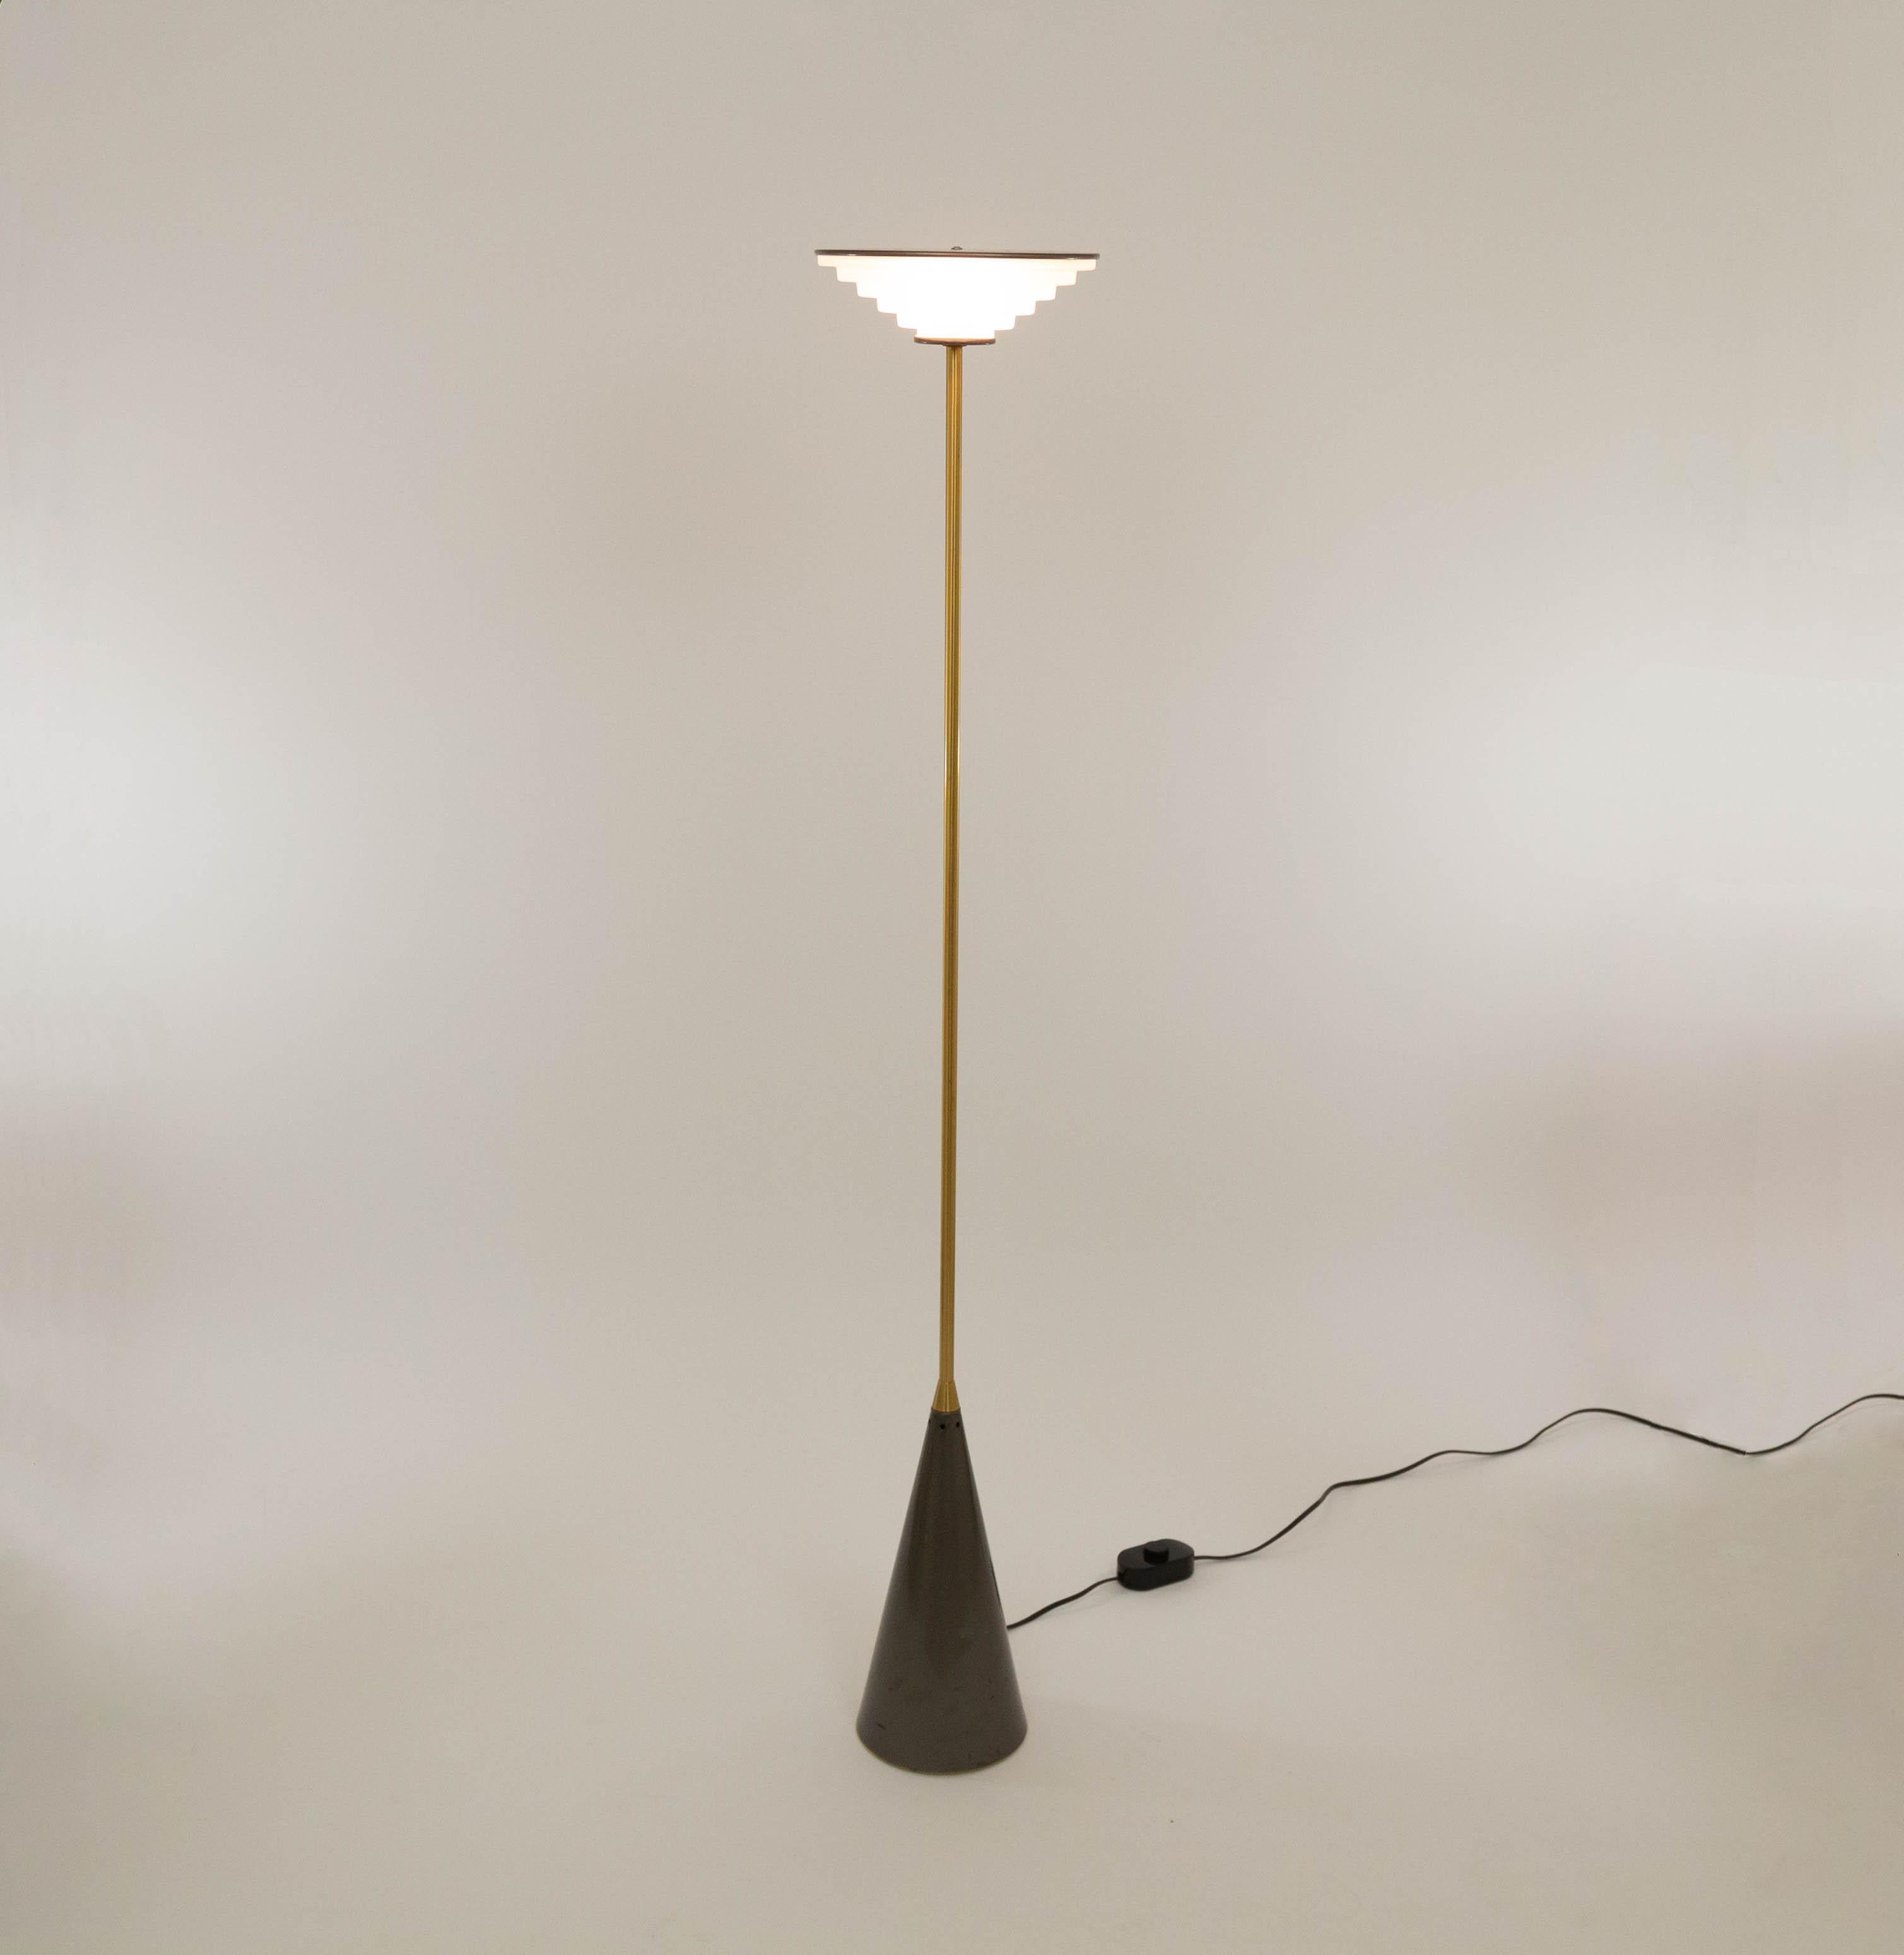 Ziggurat is a halogen floor lamp designed by Shigeaki Asahara in 1981, and manufactured by Italian lighting manufacturer Stilnovo.

The lamp consists of a conical metal base and an inverted ziggurat-shaped moulded glass diffuser with a metal top.